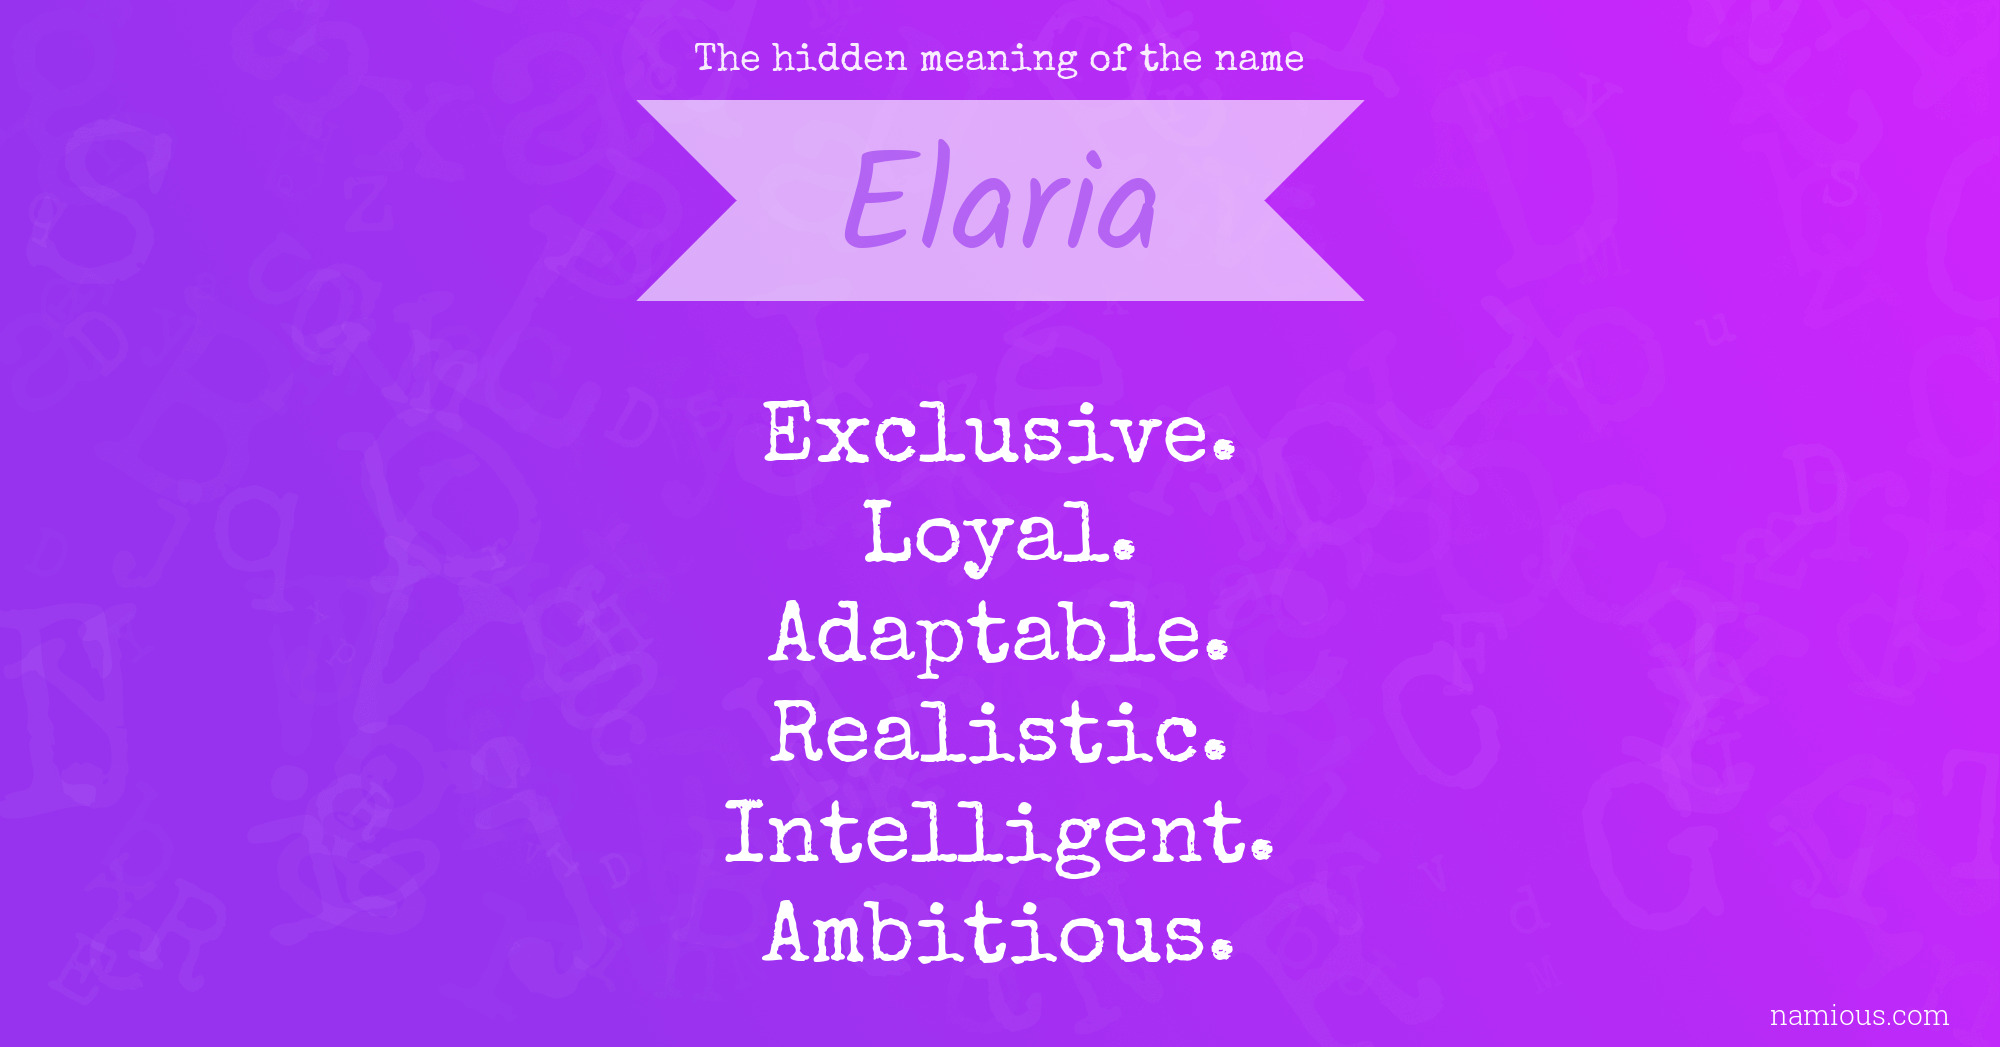 The hidden meaning of the name Elaria